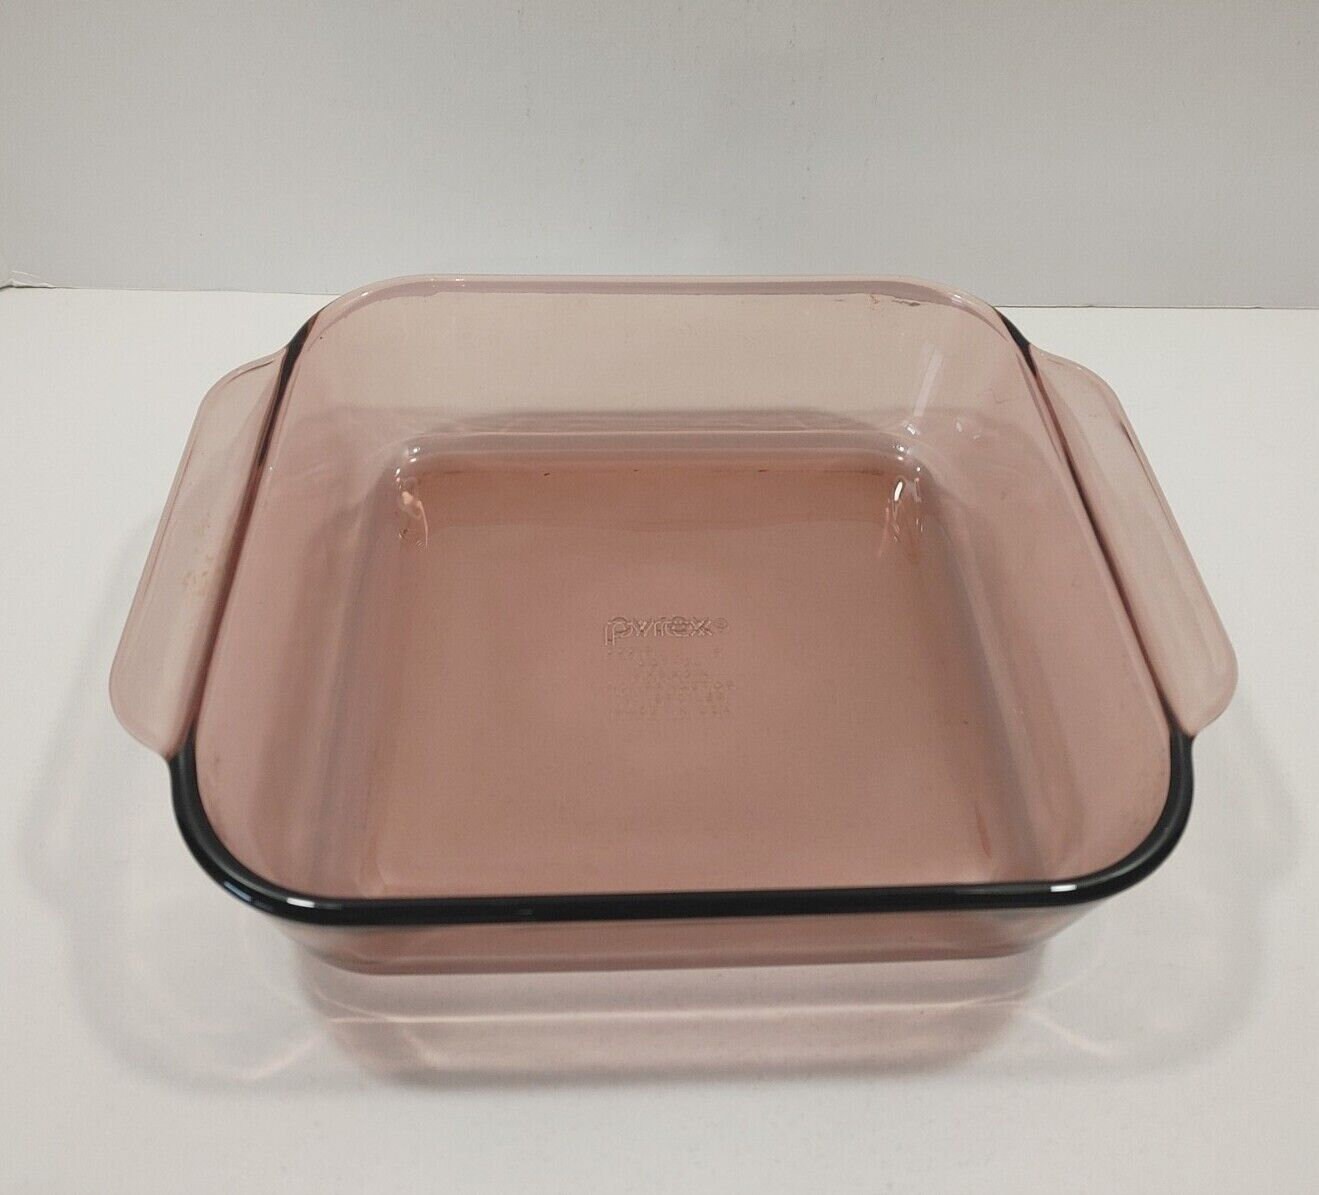 8 Cobalt Blue Vintage Anchor Hocking Brownie Baking Dish Cake Pan With  Thick Walls and Handles 8 X 8 X 2 1035 or Casserole Dish Side Dish 